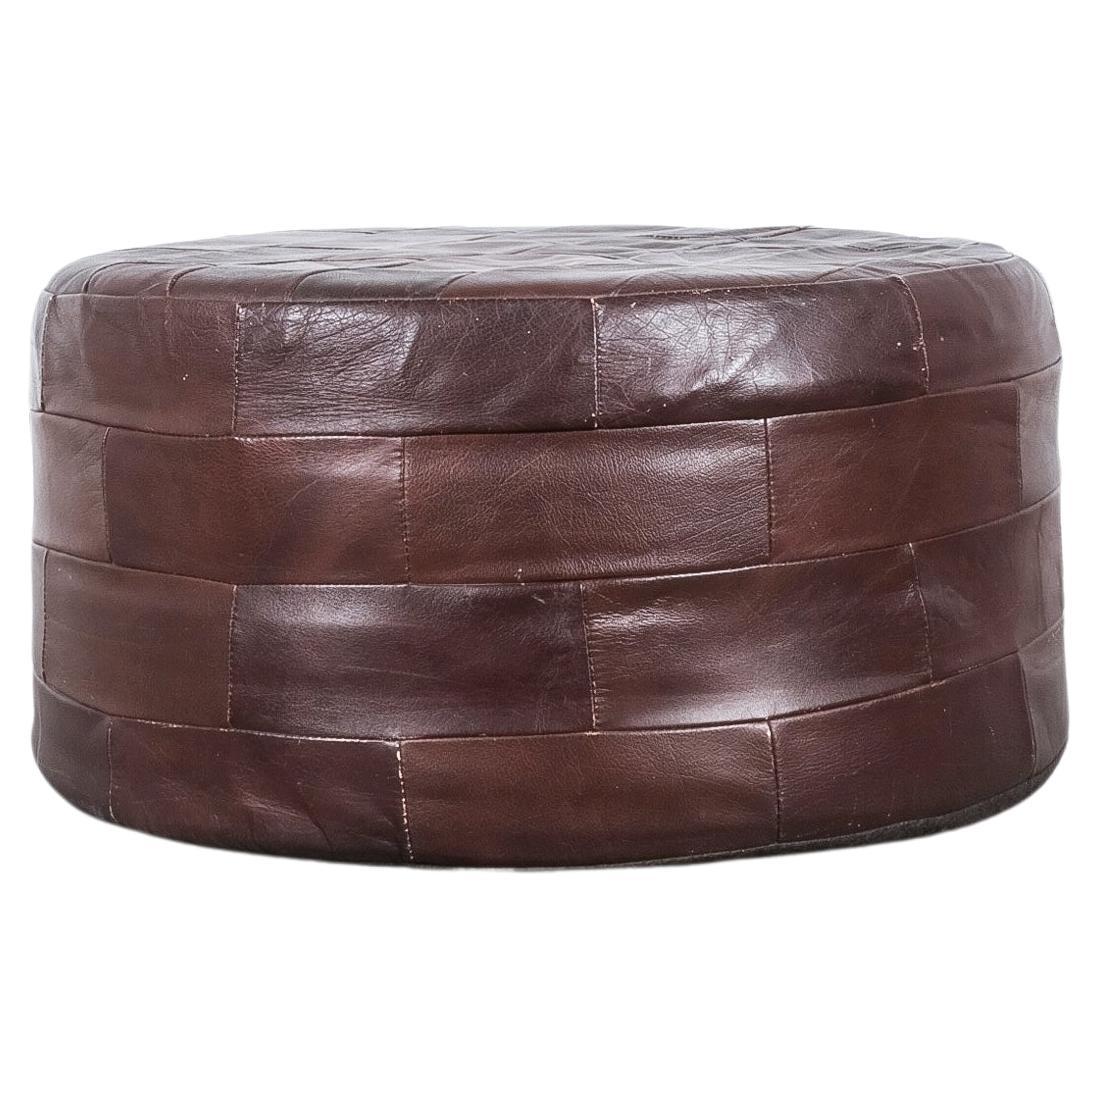 Brown Leather Patchwork Bean Bag or Pouf, 1970 For Sale